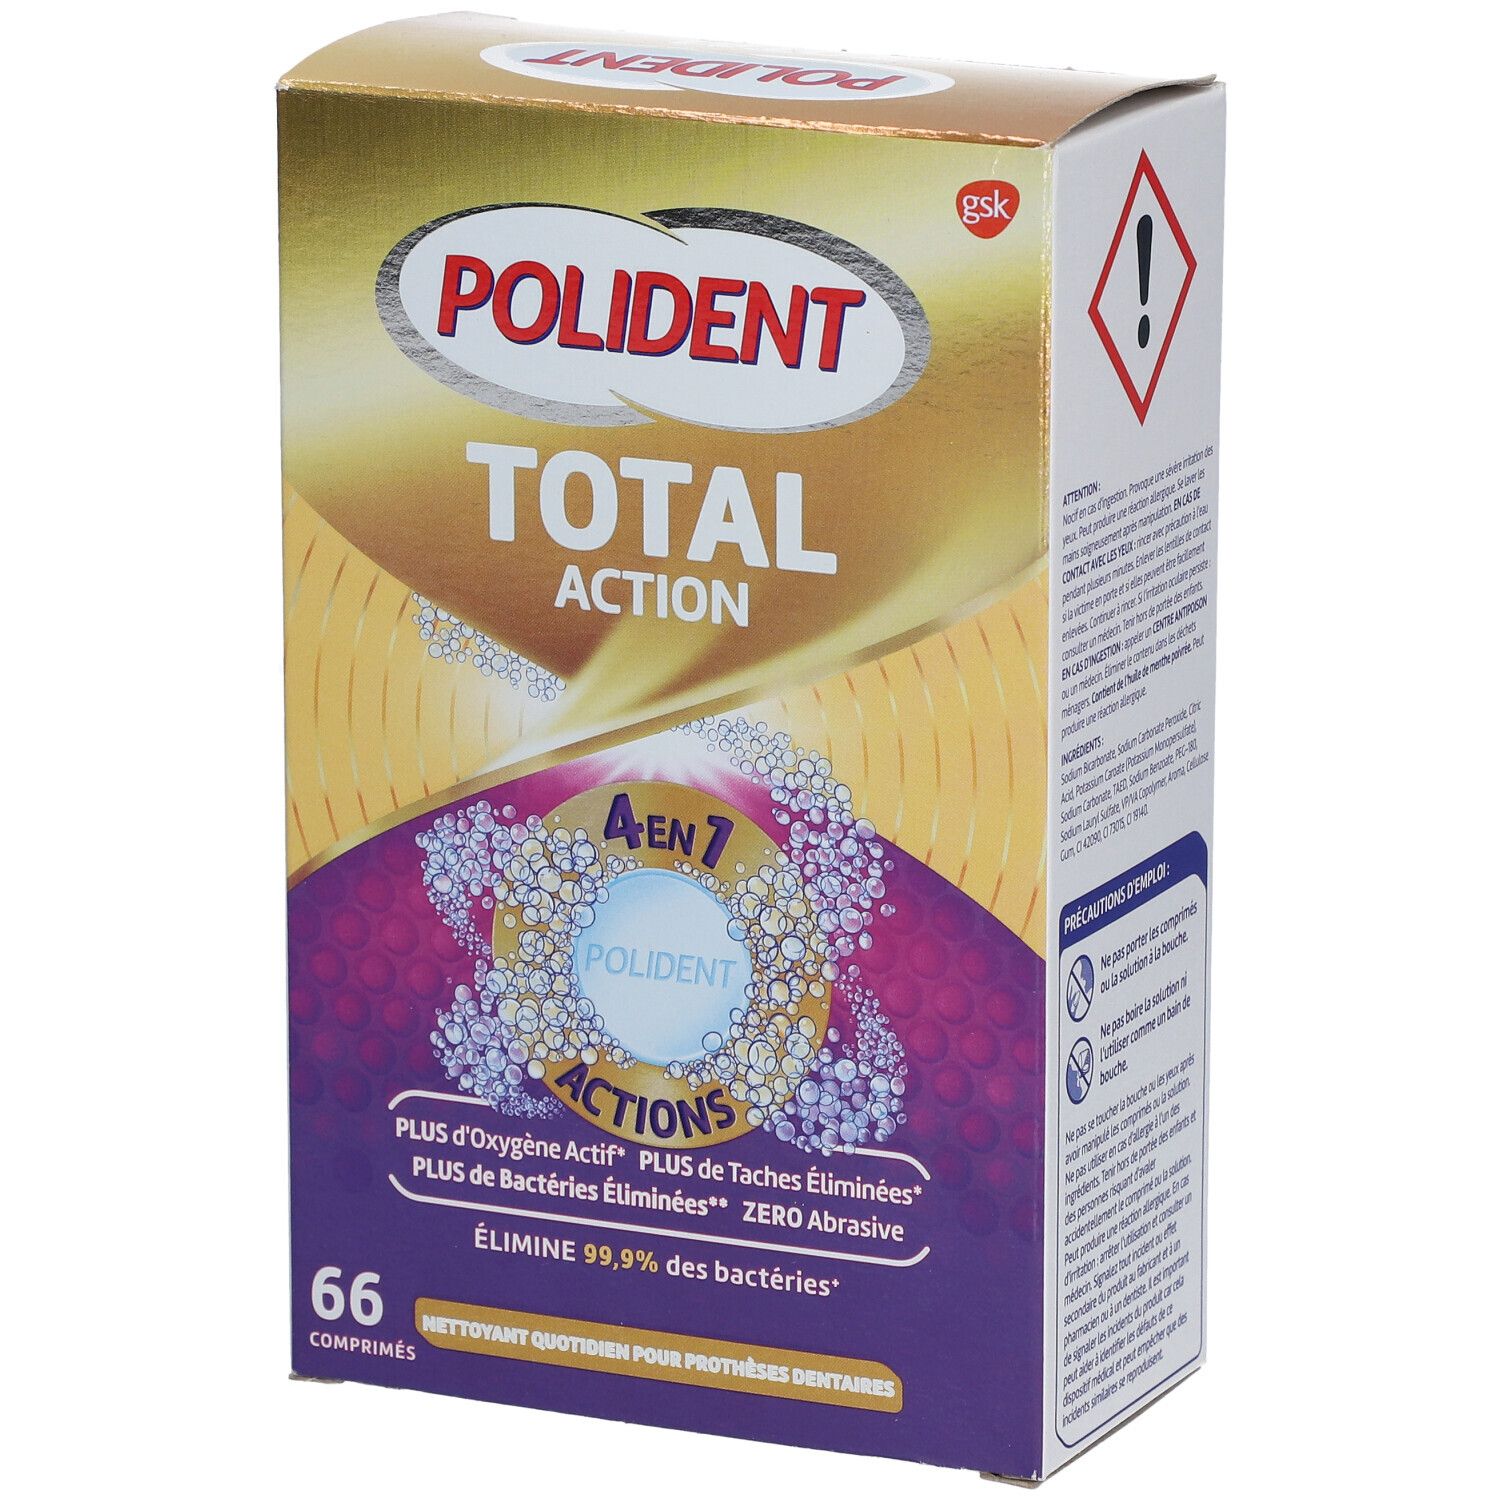 Polident® Total Action nettoyant